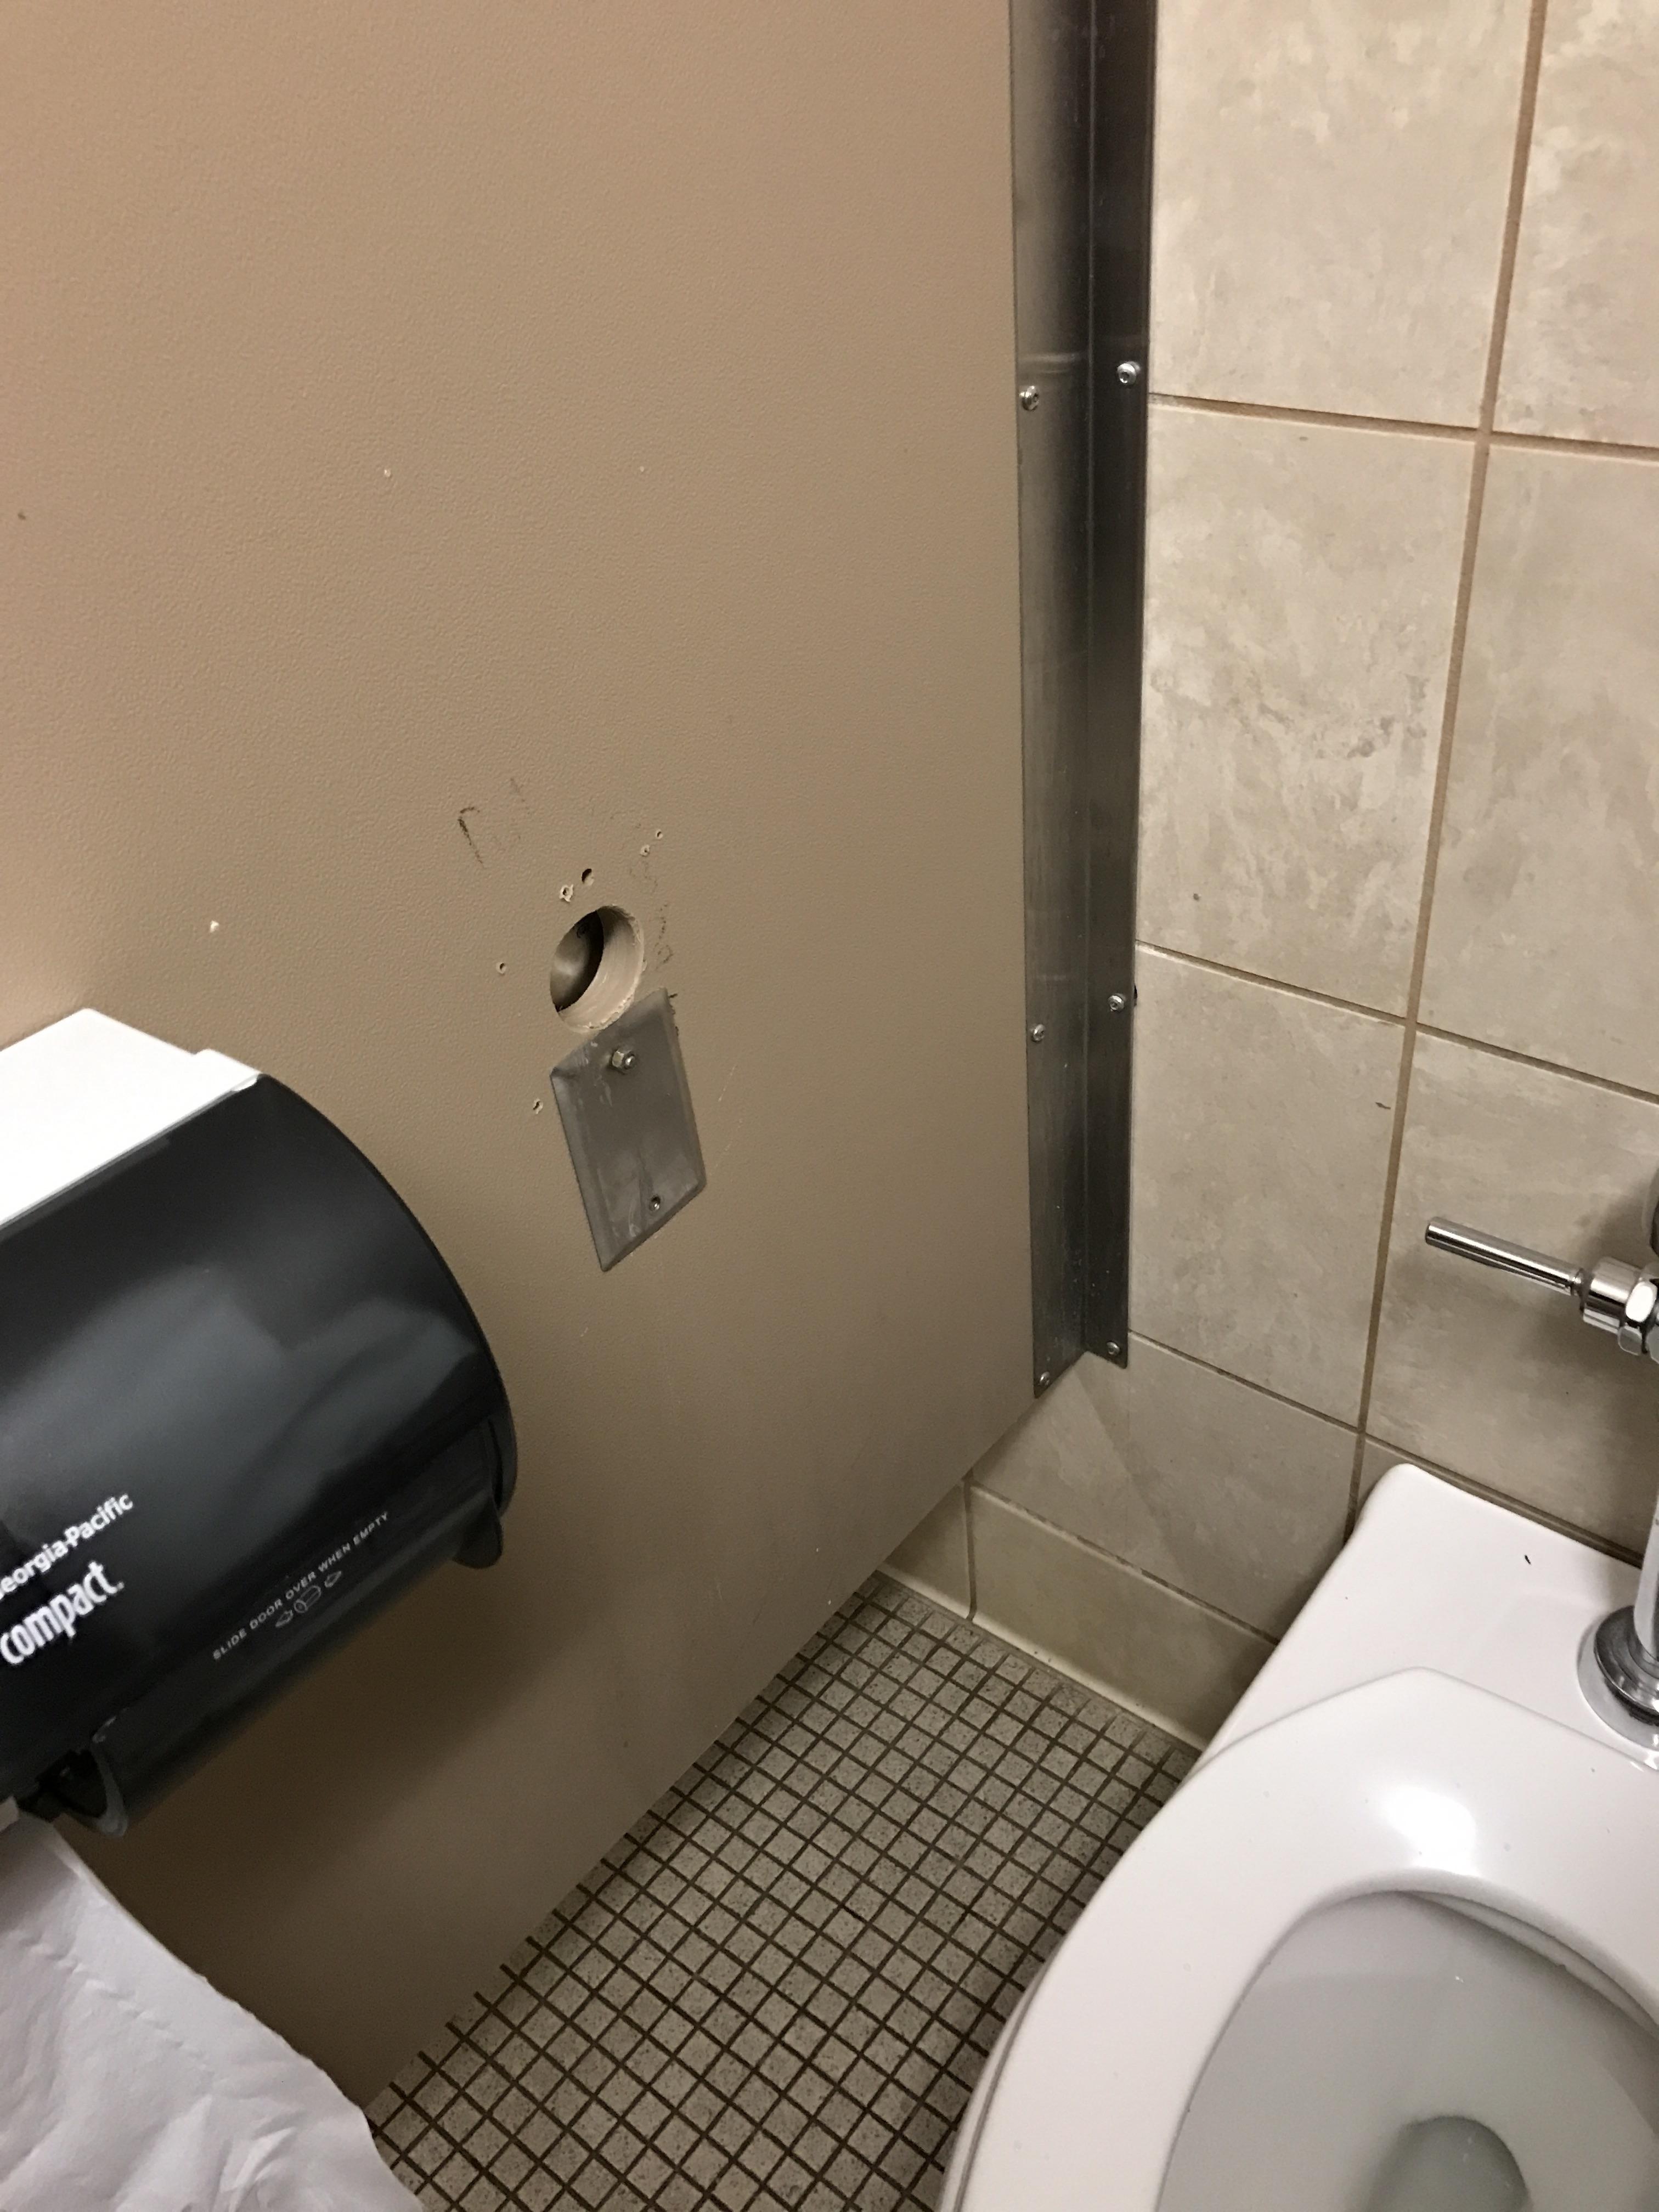 best of Spots in tennessee Gloryhole